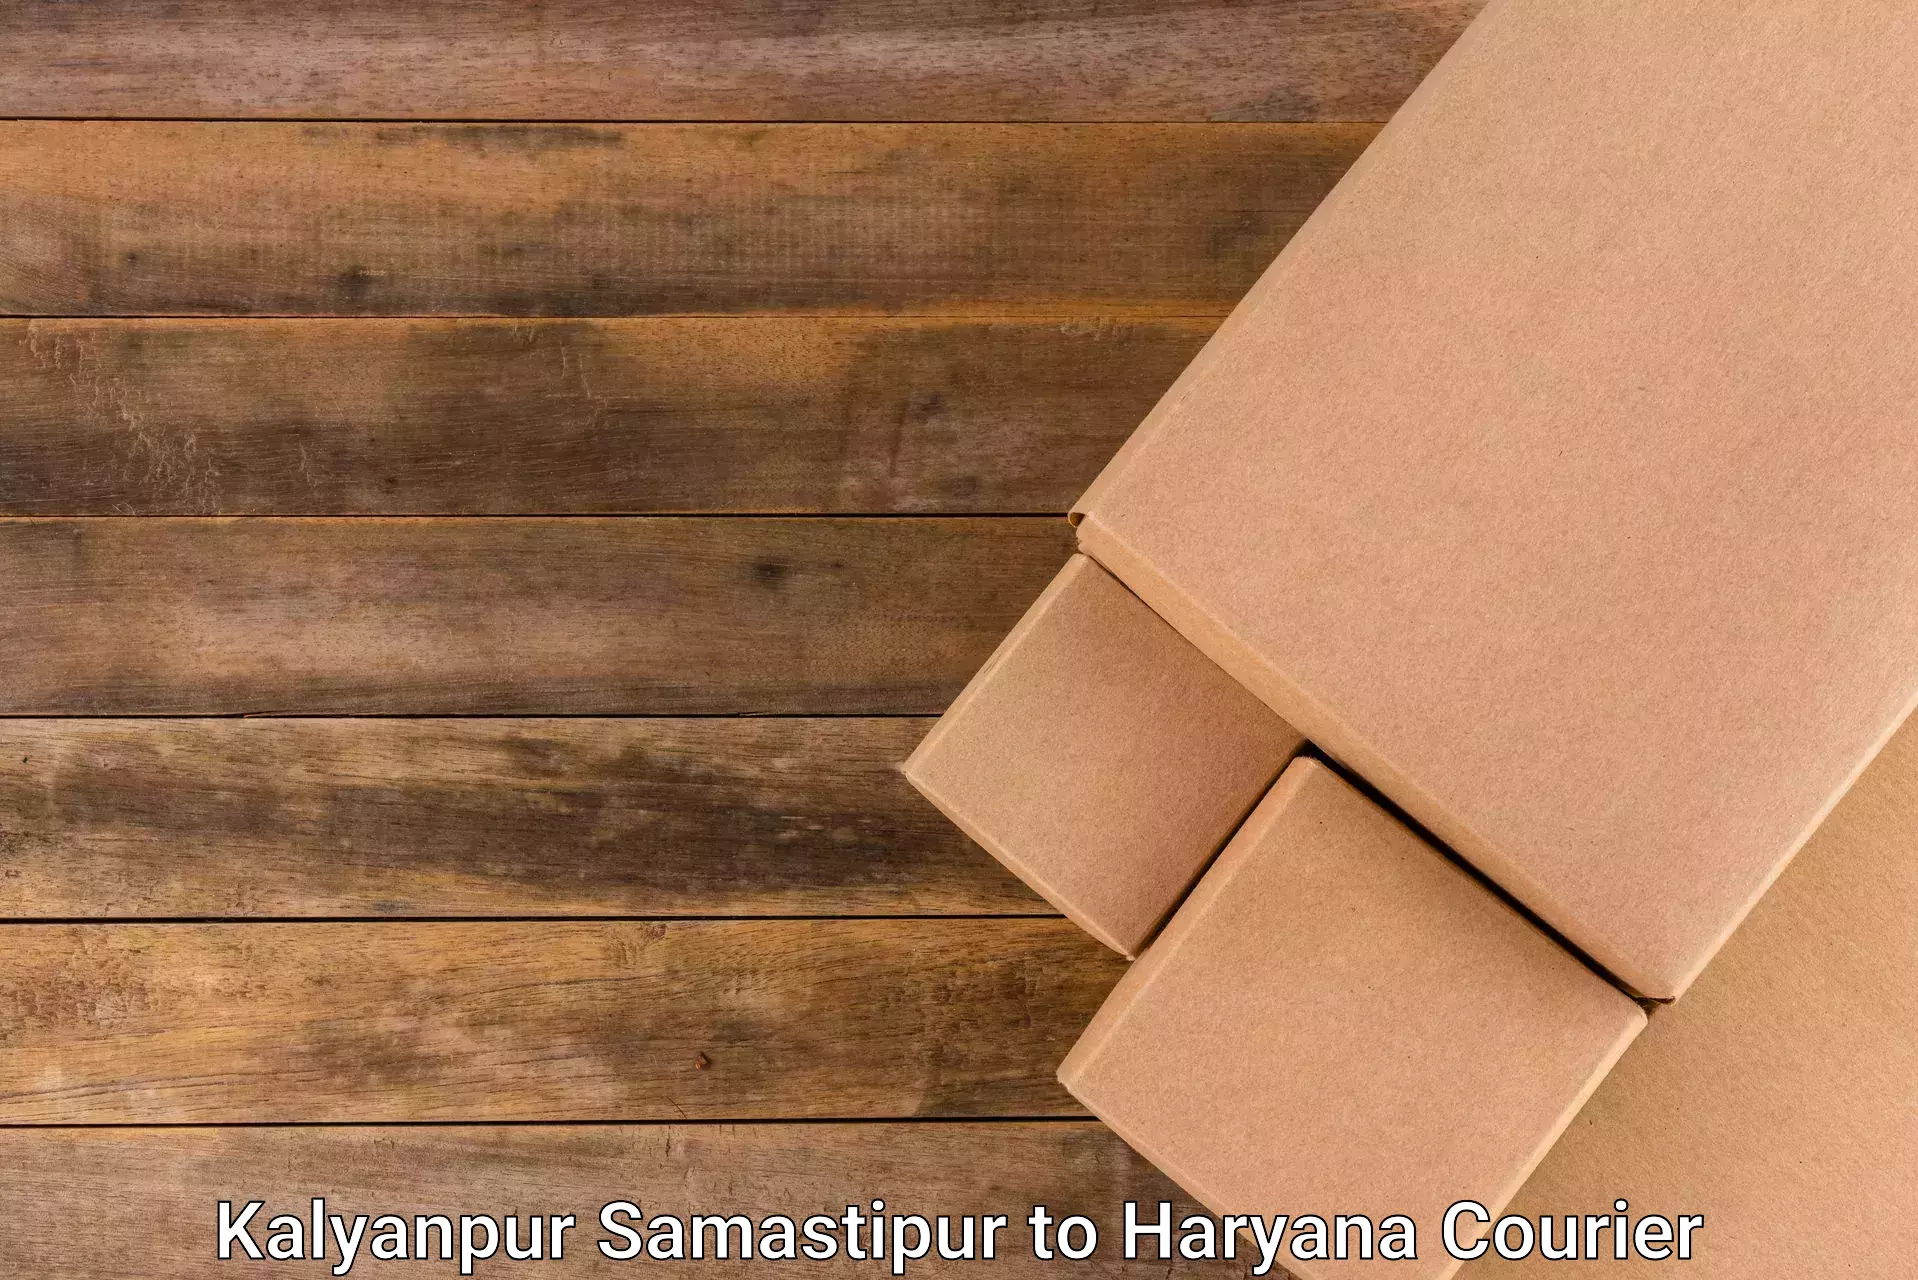 24-hour courier service Kalyanpur Samastipur to Agroha